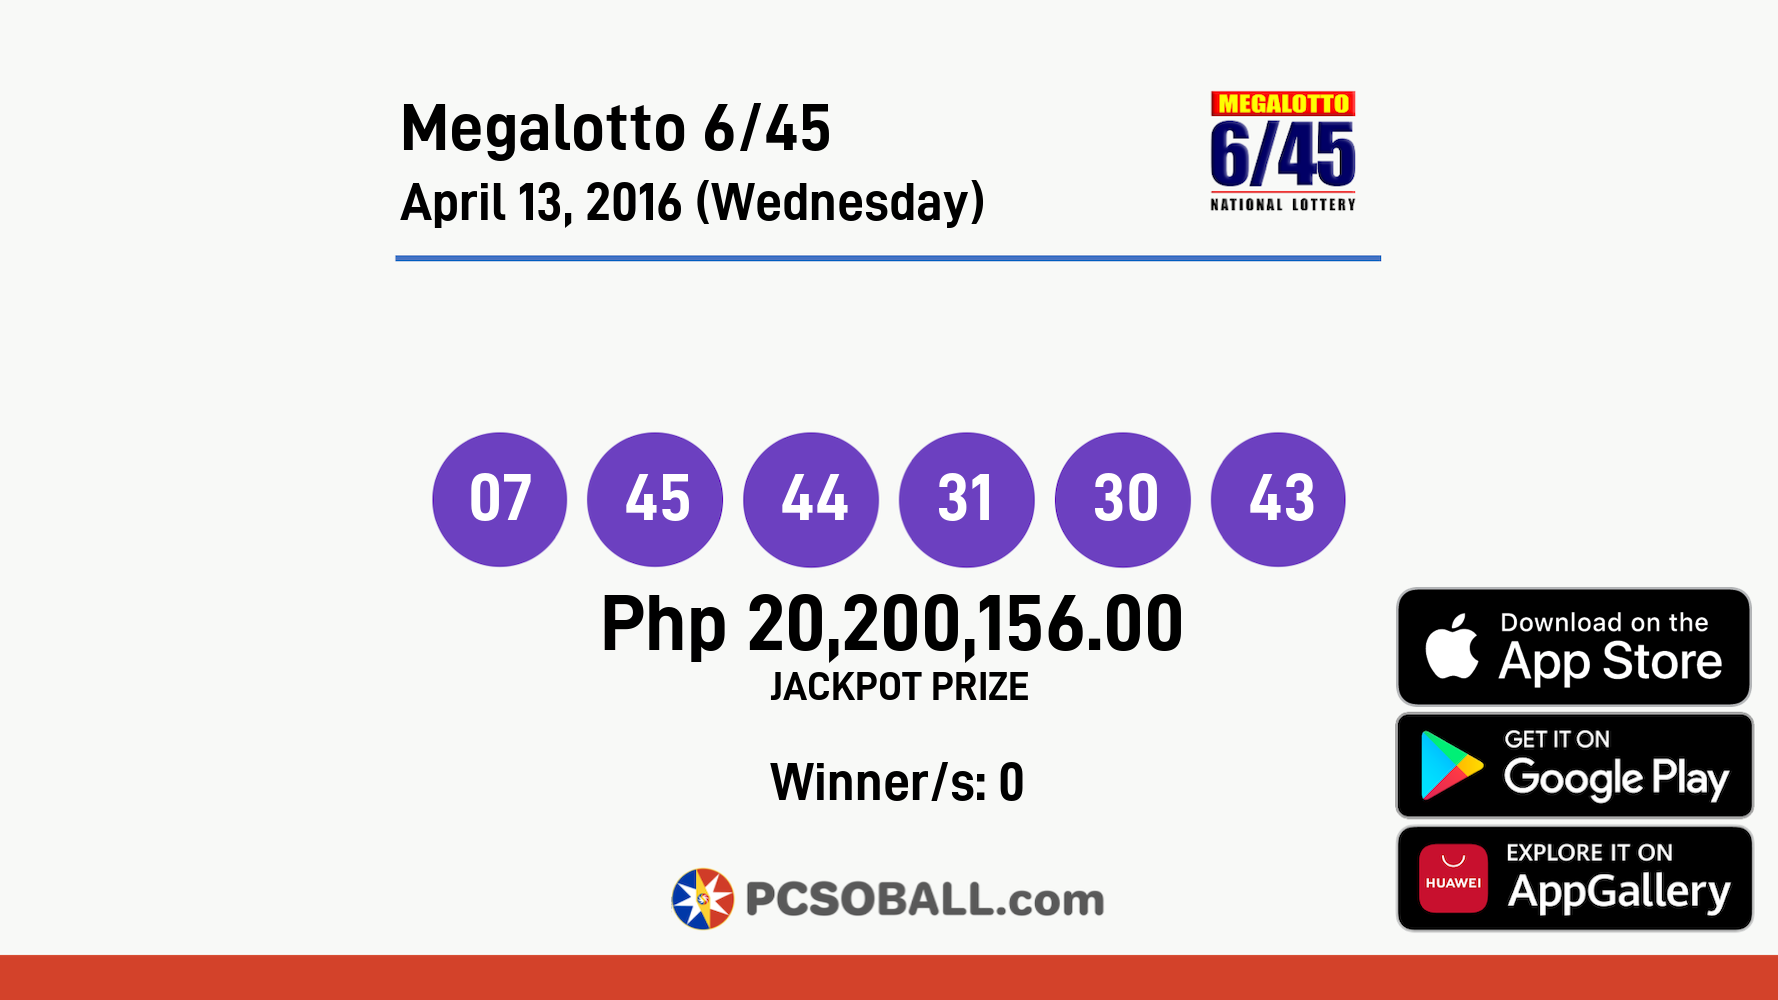 Megalotto 6/45 April 13, 2016 (Wednesday) Result